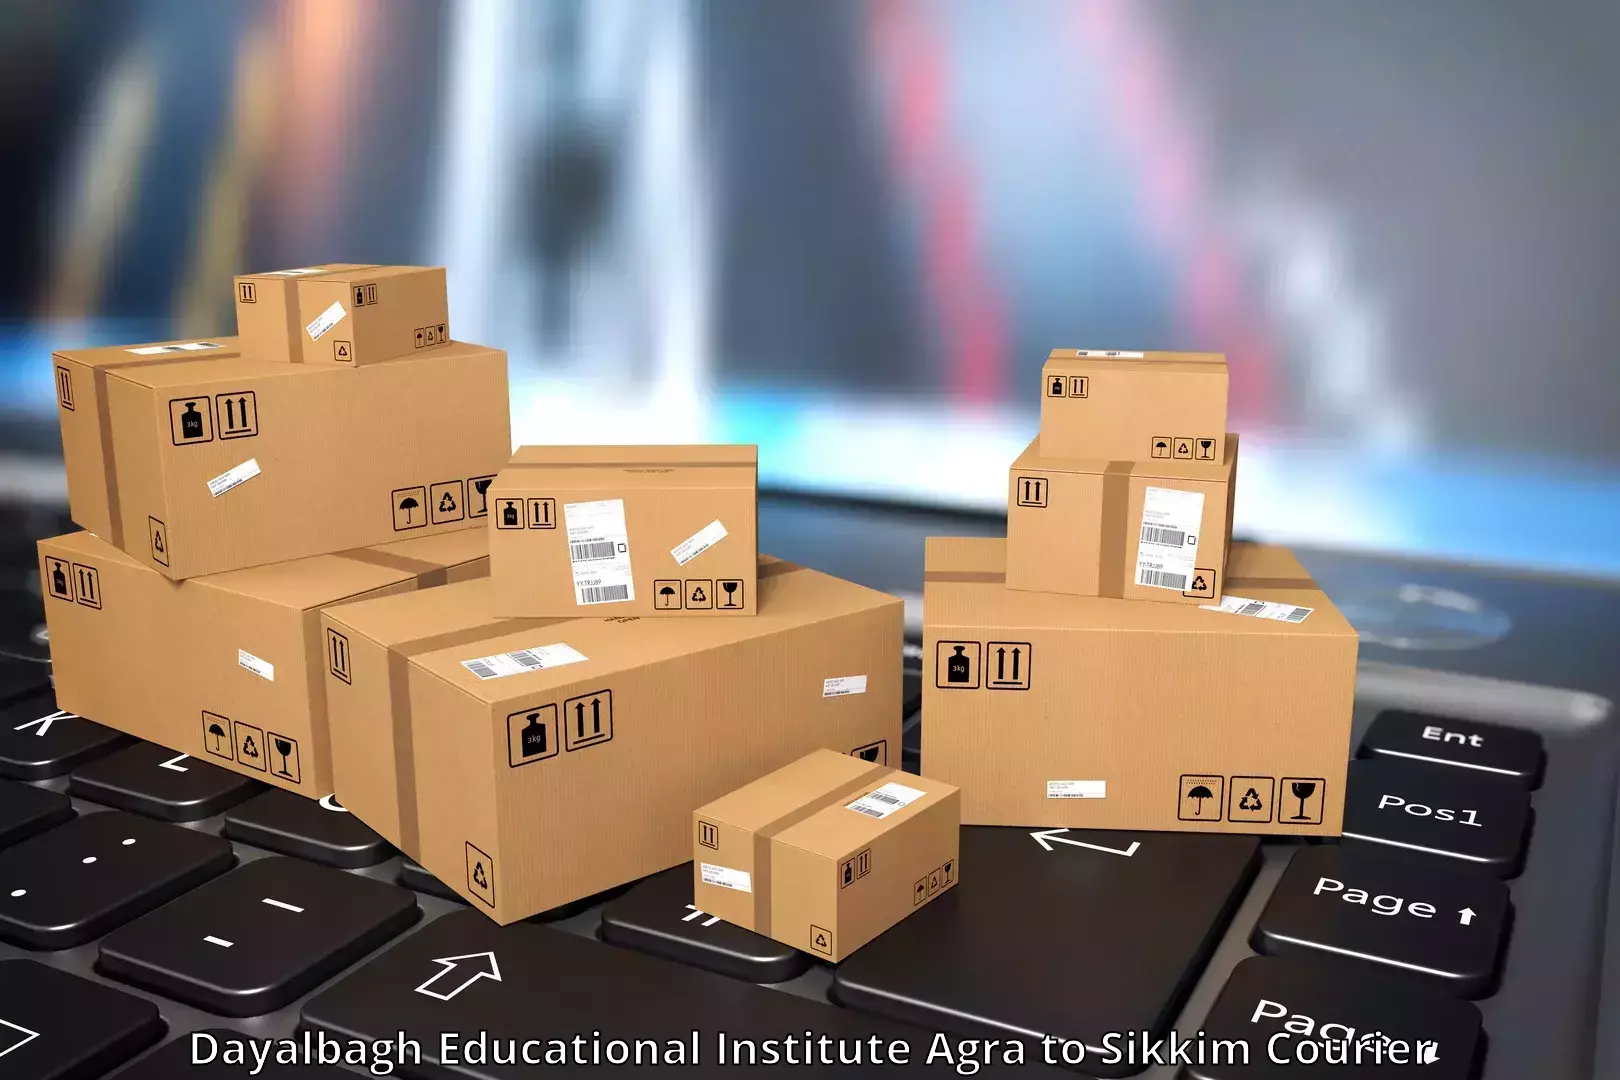 Punctual parcel services Dayalbagh Educational Institute Agra to Mangan